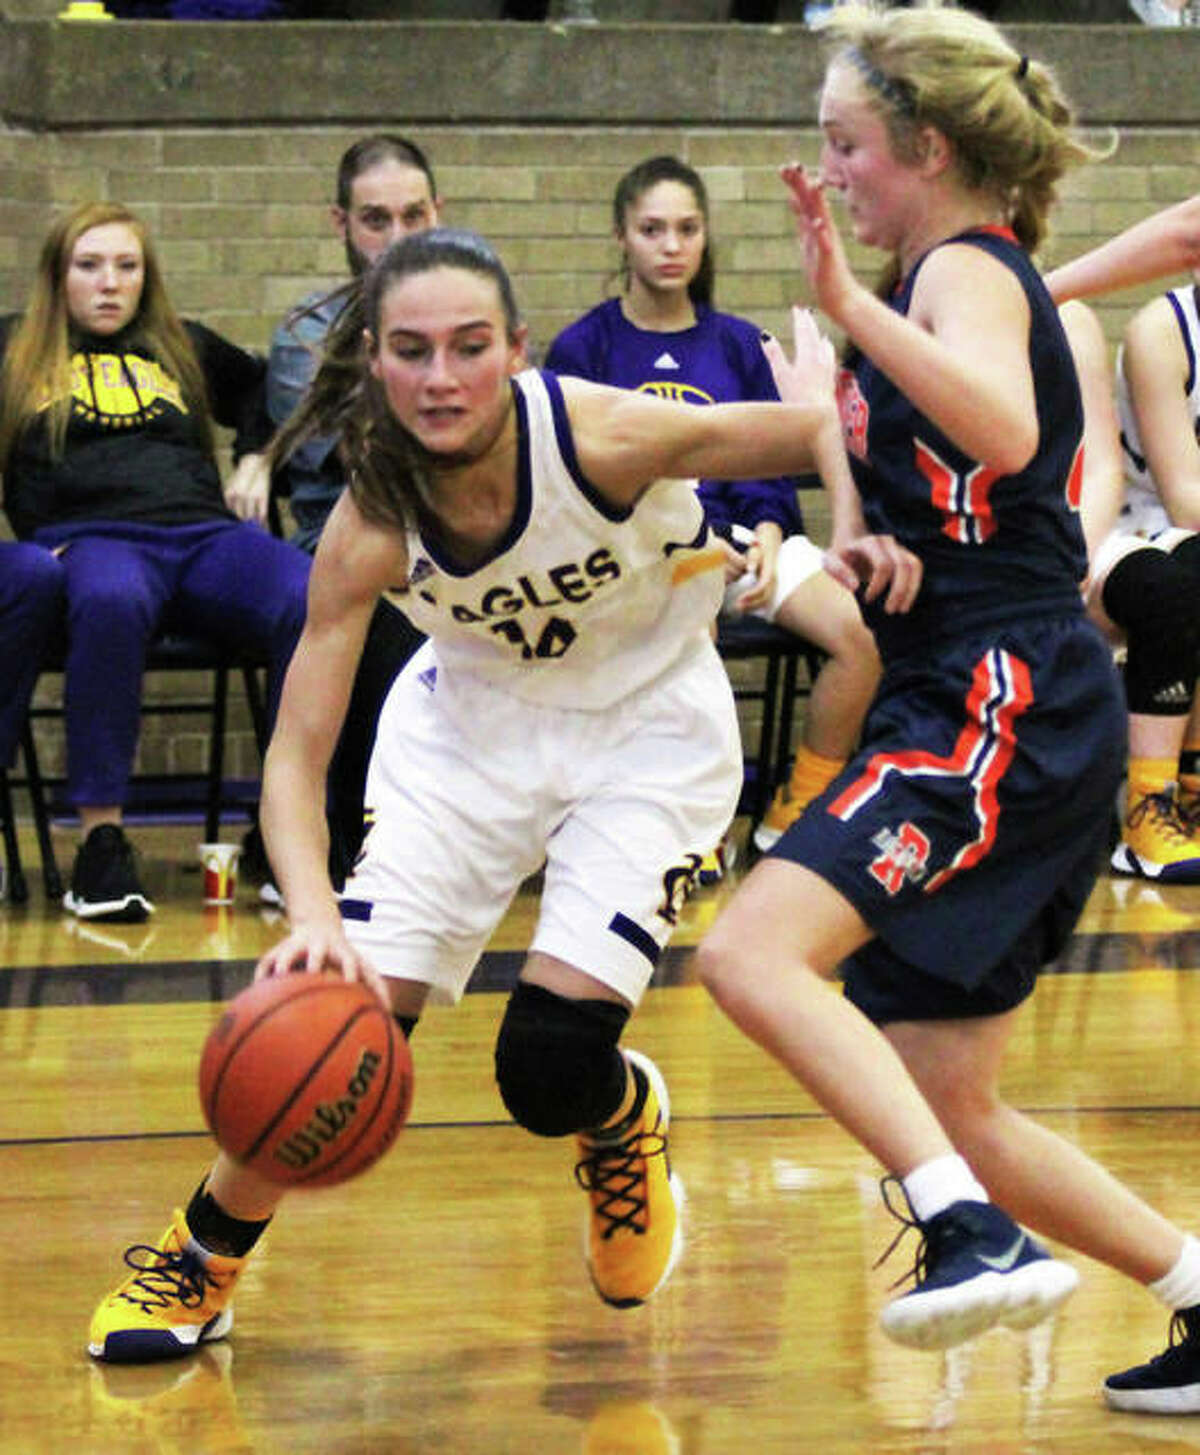 CM’s Hannah Sontag (left) drives on Rochester’s Abby Walton during a Thanksgiving tournament game in Taylorville as a sophomore in November 2018. Sixteen days later, Sontag suffered what proved to be a career-ending knee injury.